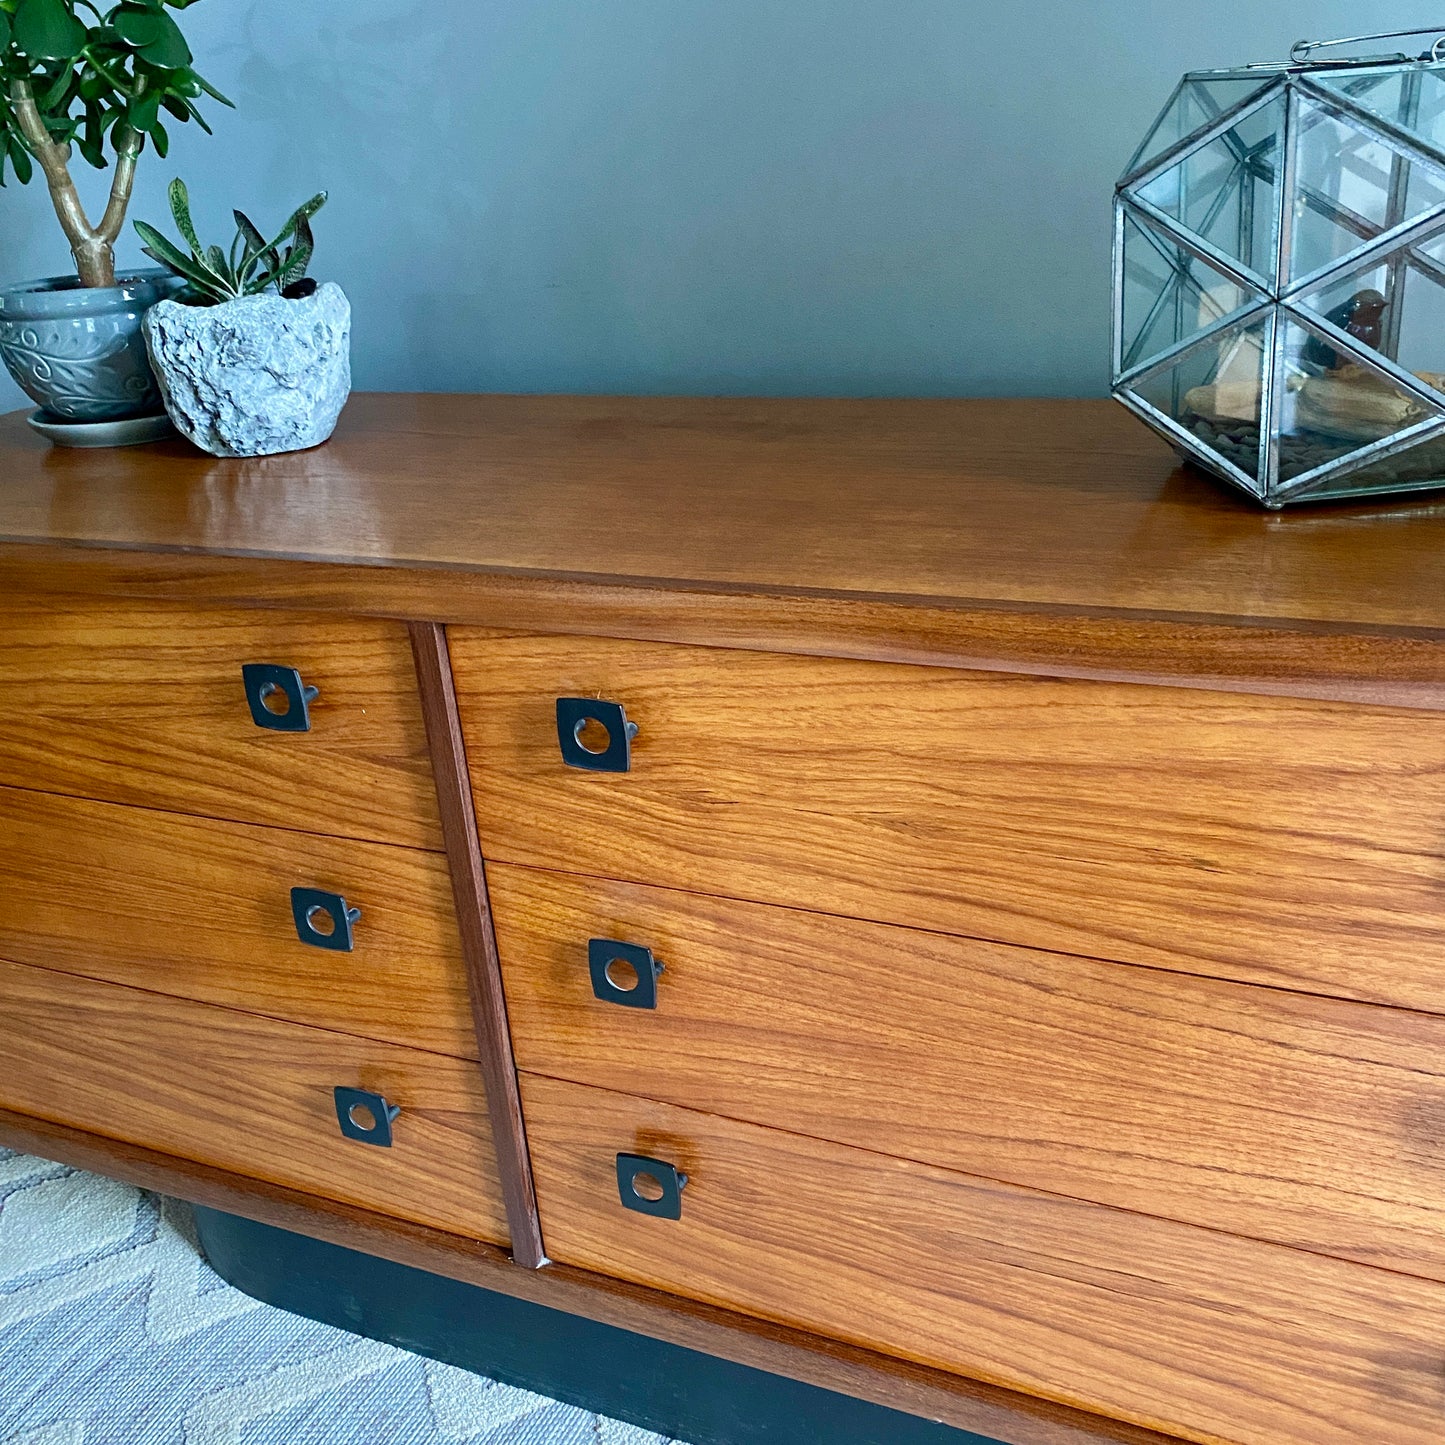 Stunning MCM Dresser Teak with 6 Drawers By RS Associates